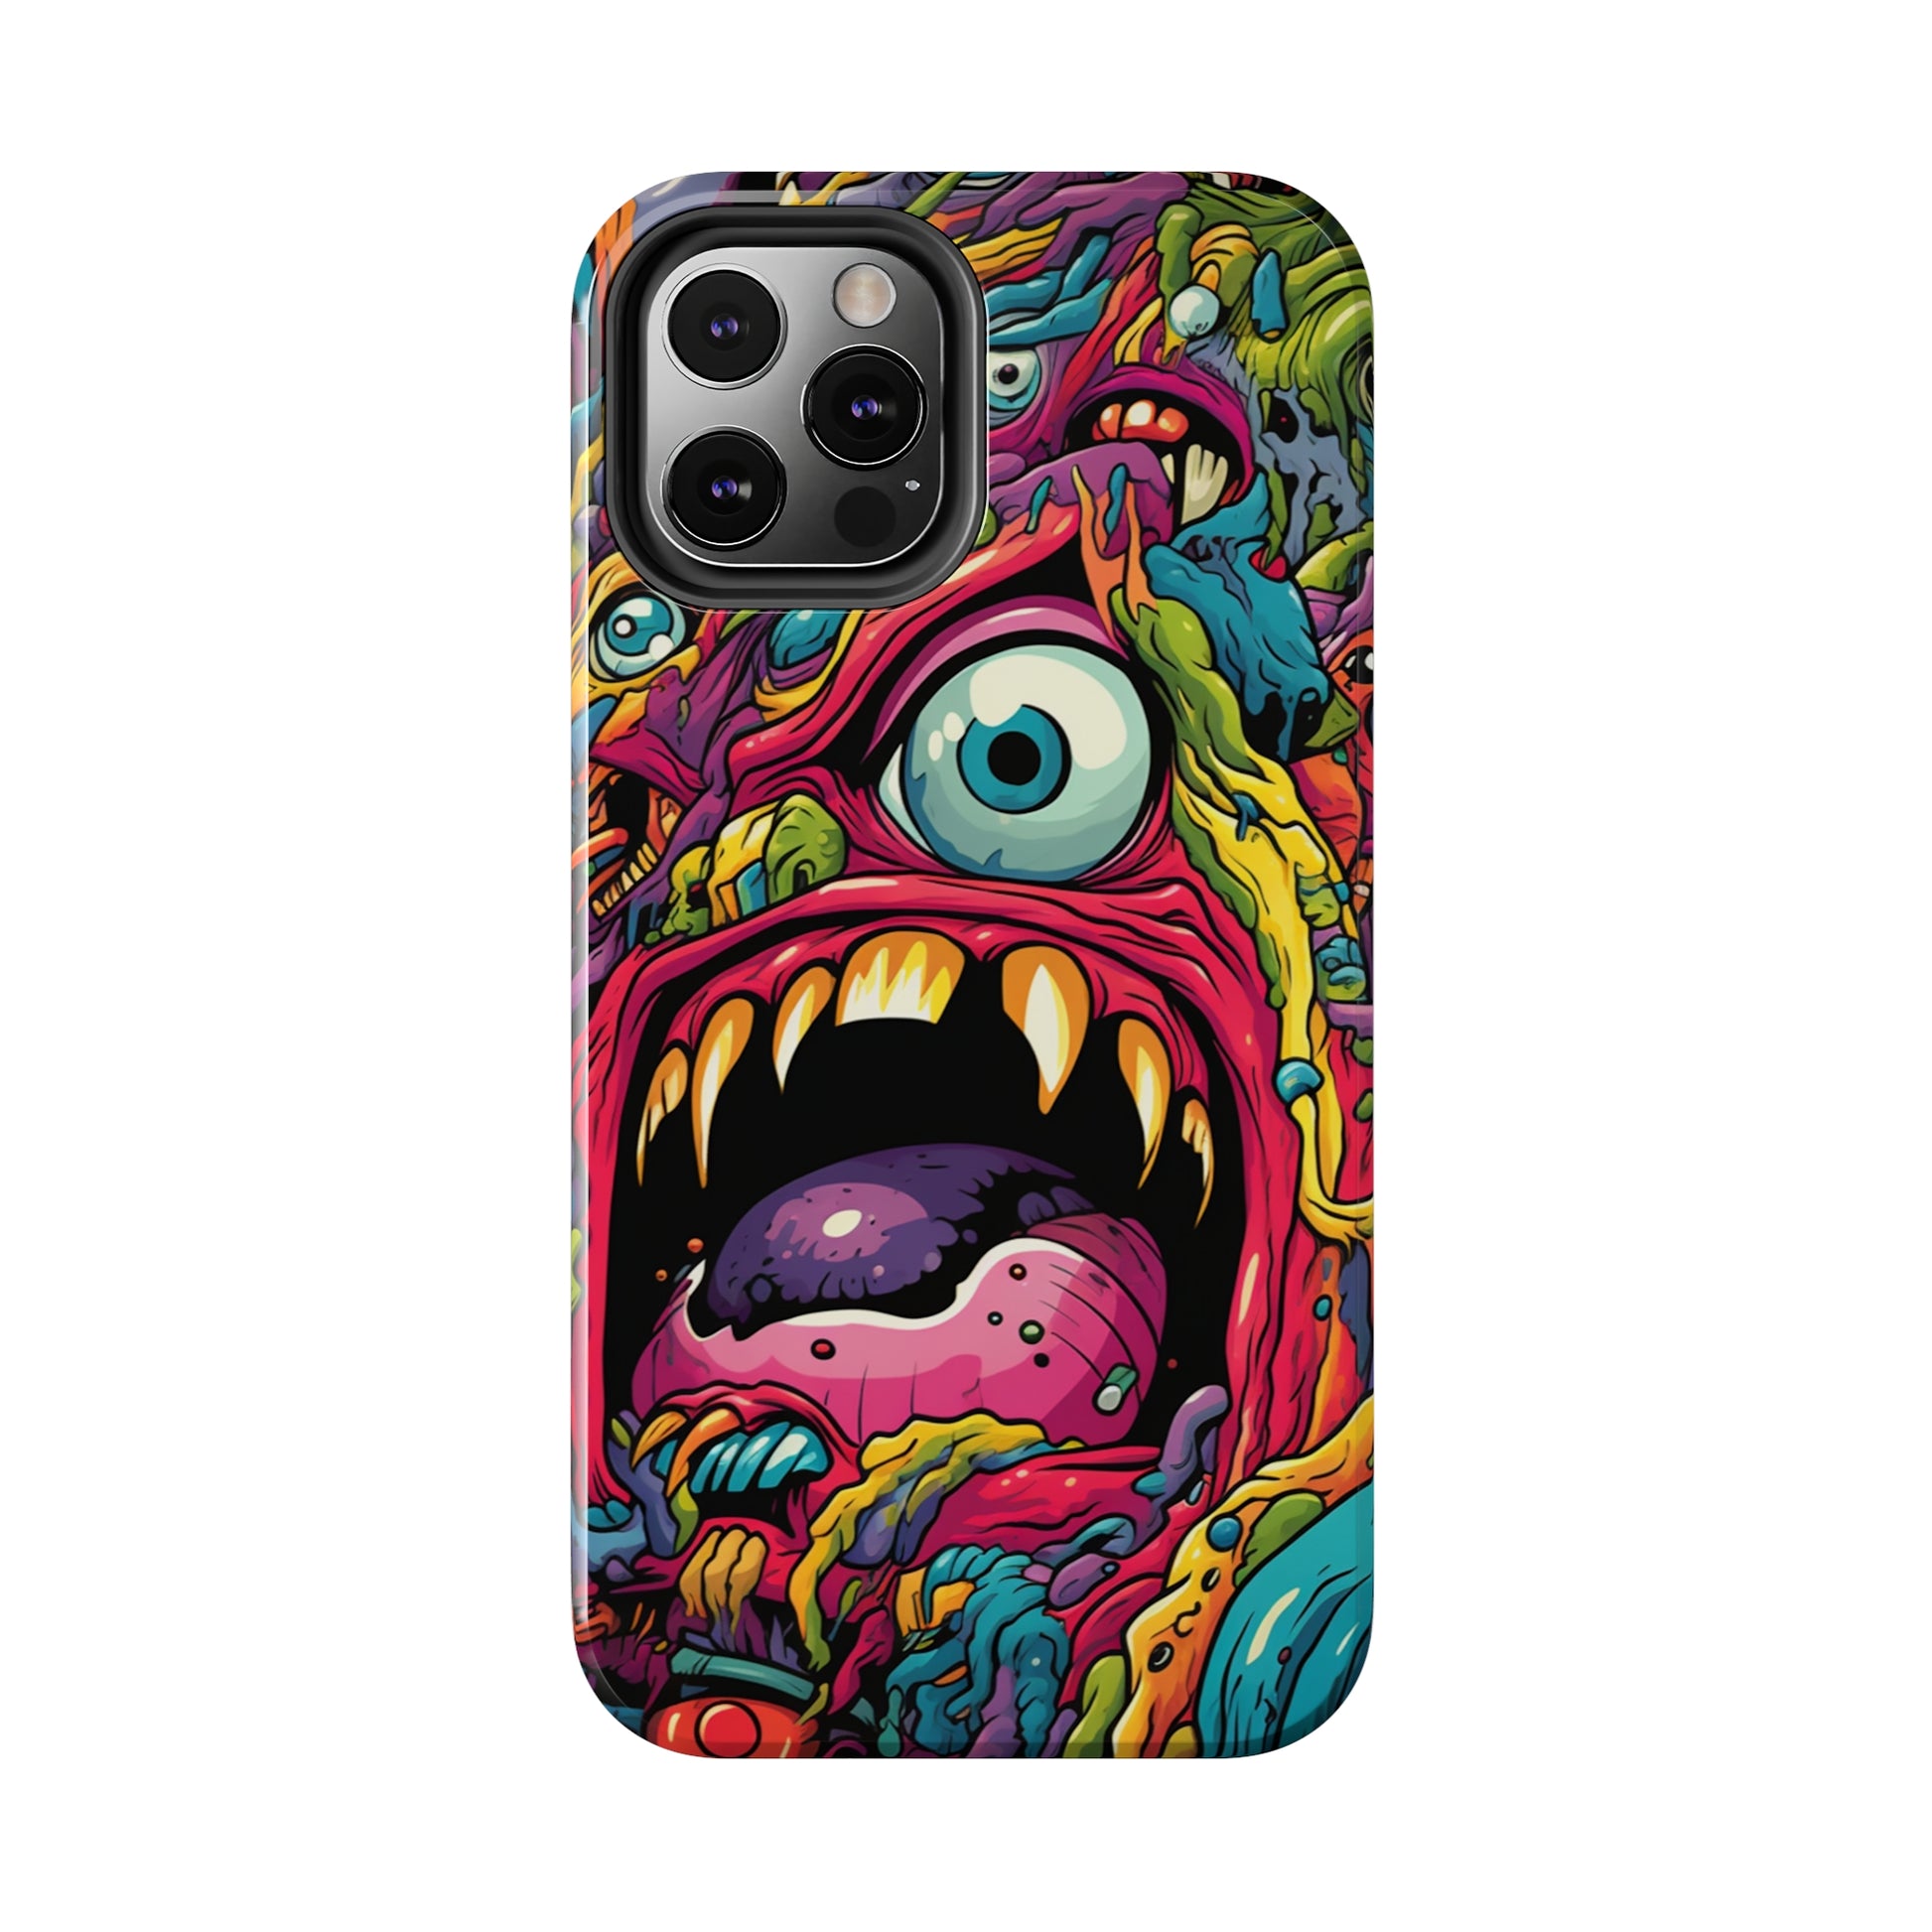 Trippy iPhone case with intricate creature patterns